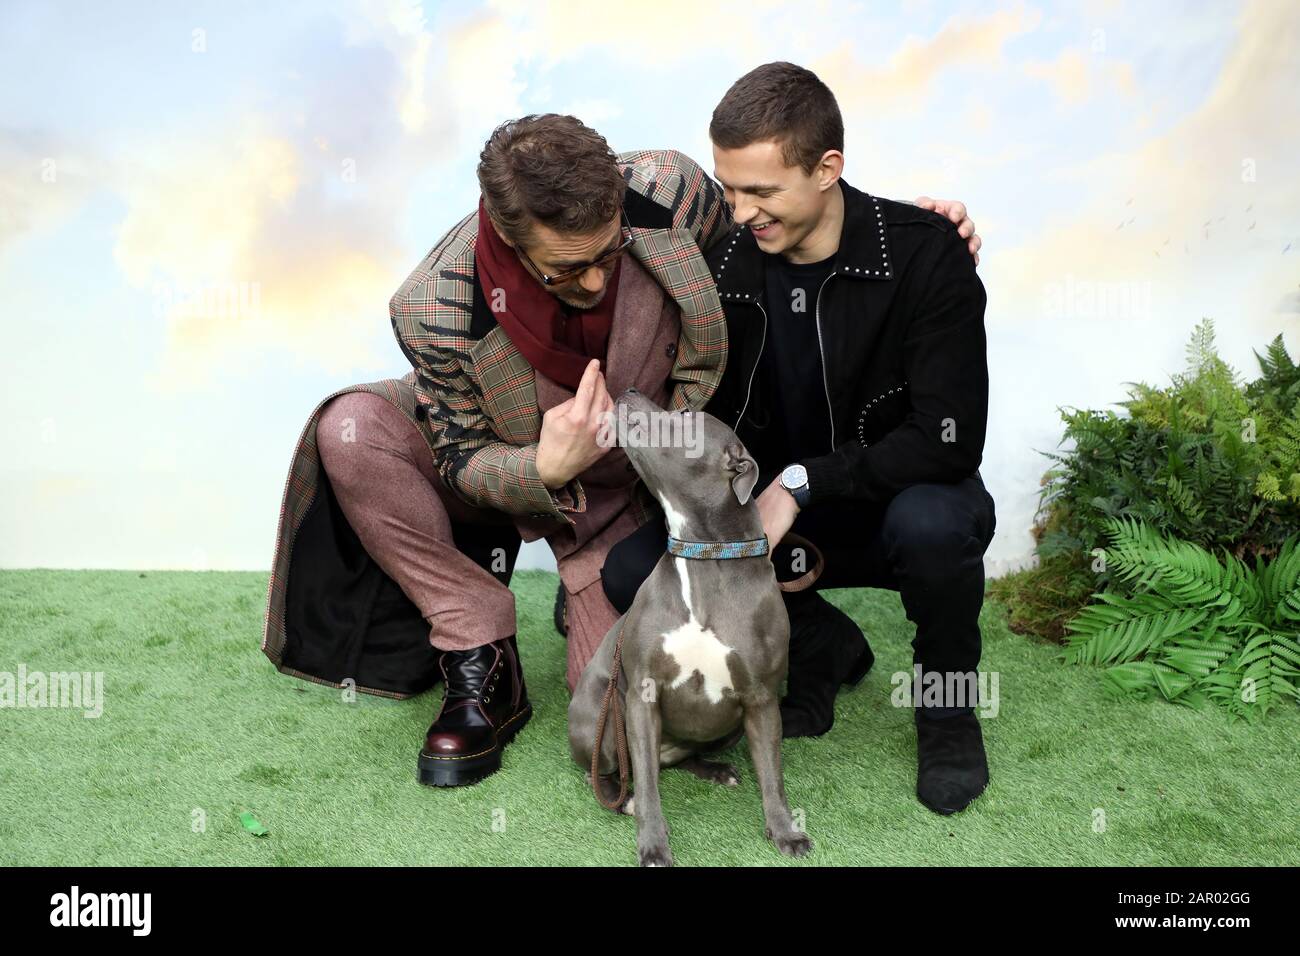 Robert Downey, Jr. (left) Tom Holland and his dog Tessa during Dolittle premiere at Leicester Square, London. Stock Photo